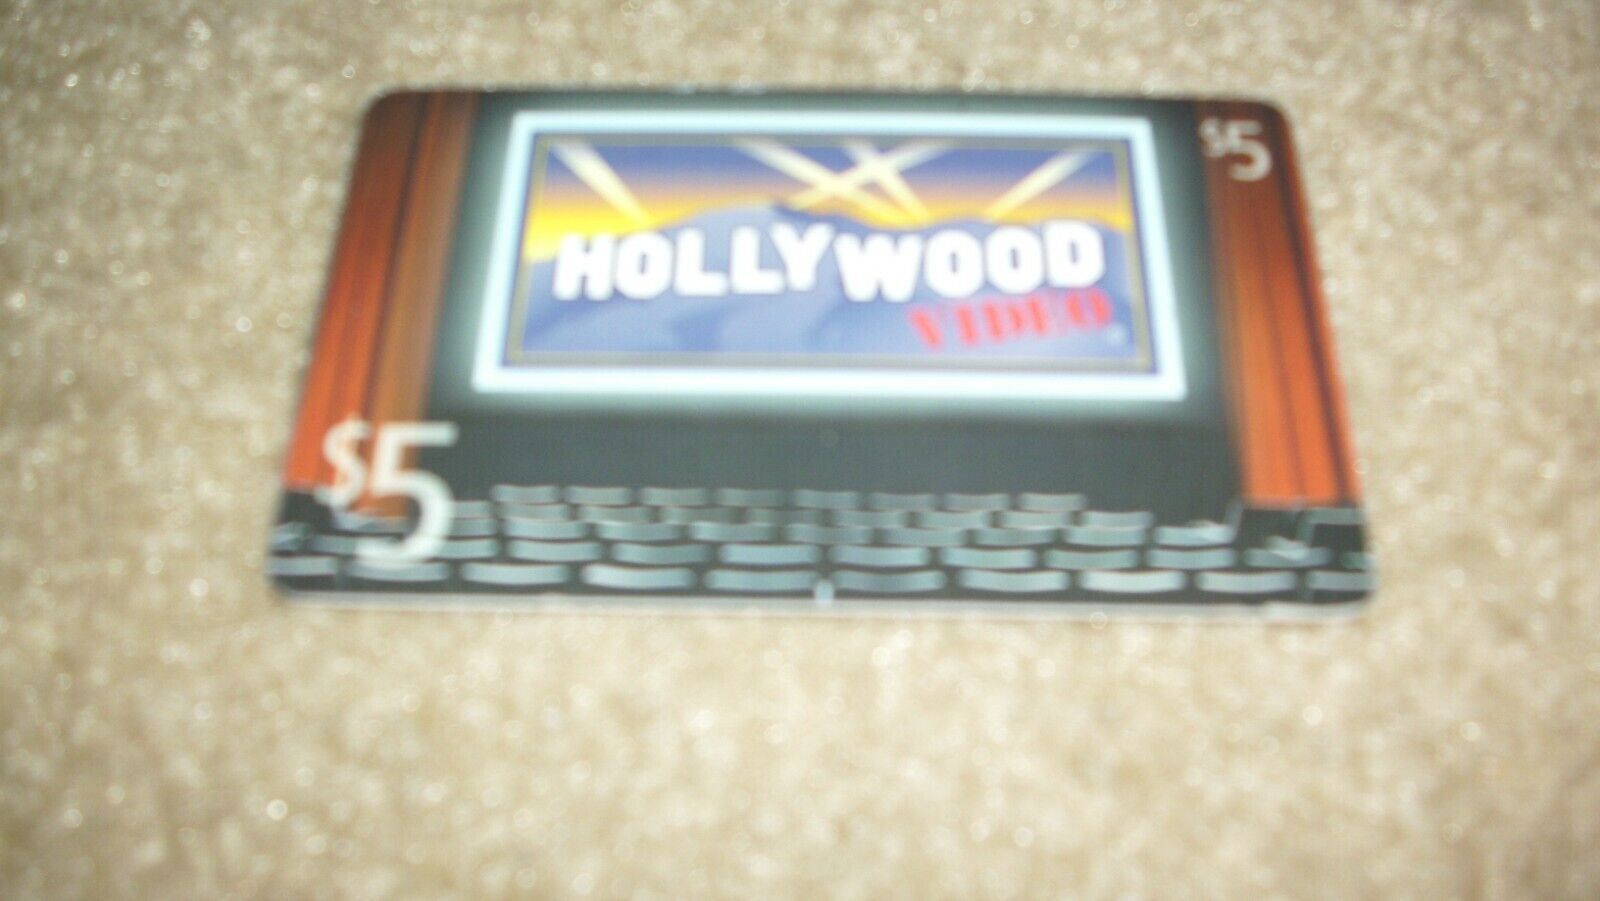 Vintage 1999 Hollywood Video $5 Gift Certificate card RARE